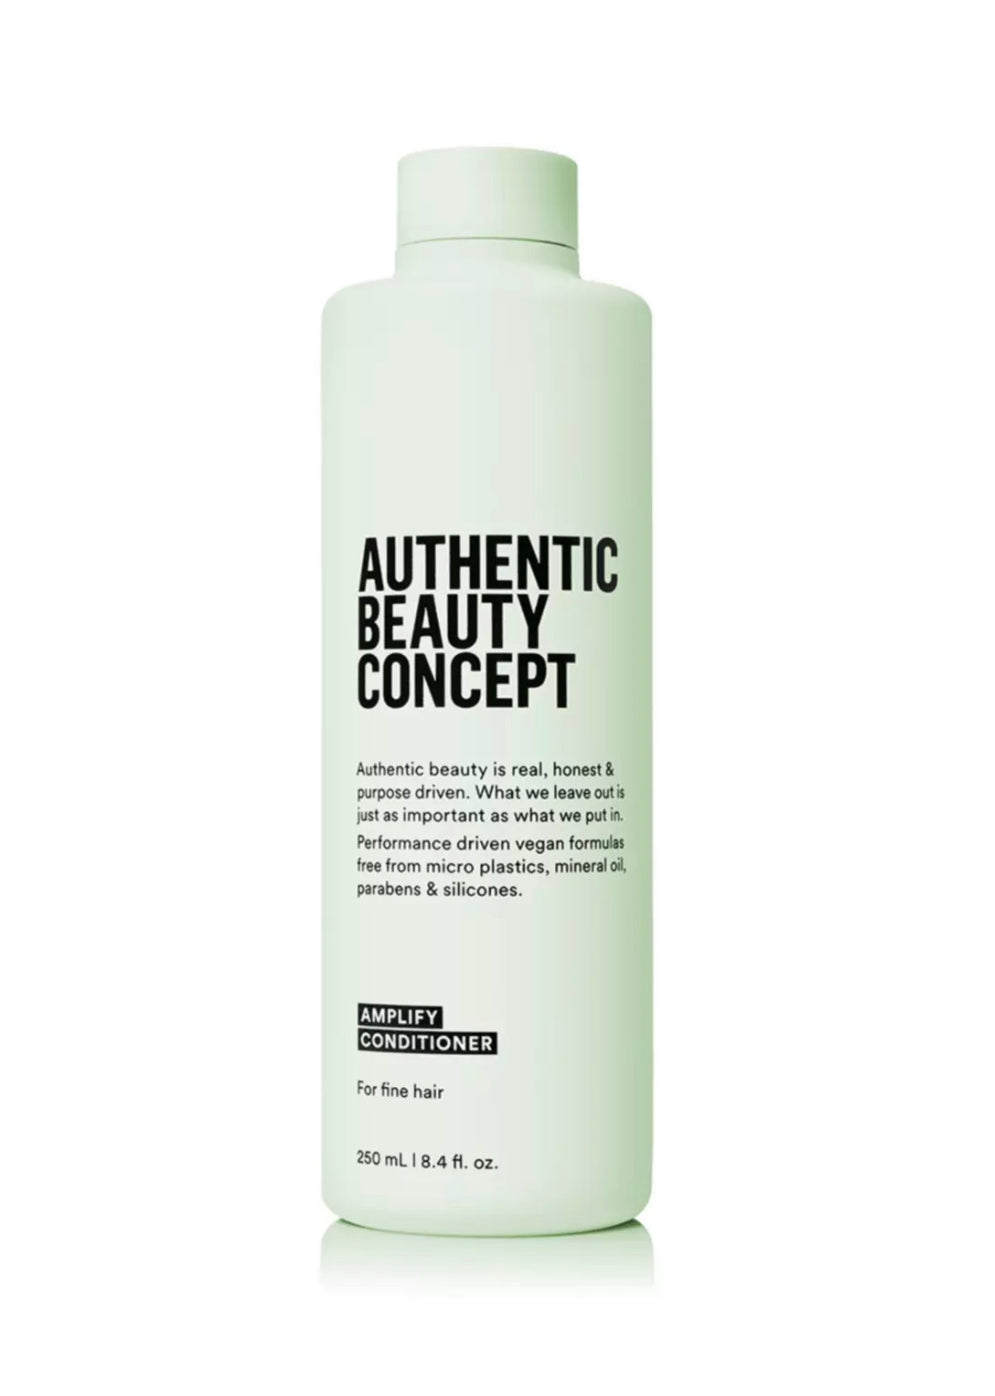 Authentic Beauty Concept amplify conditioner